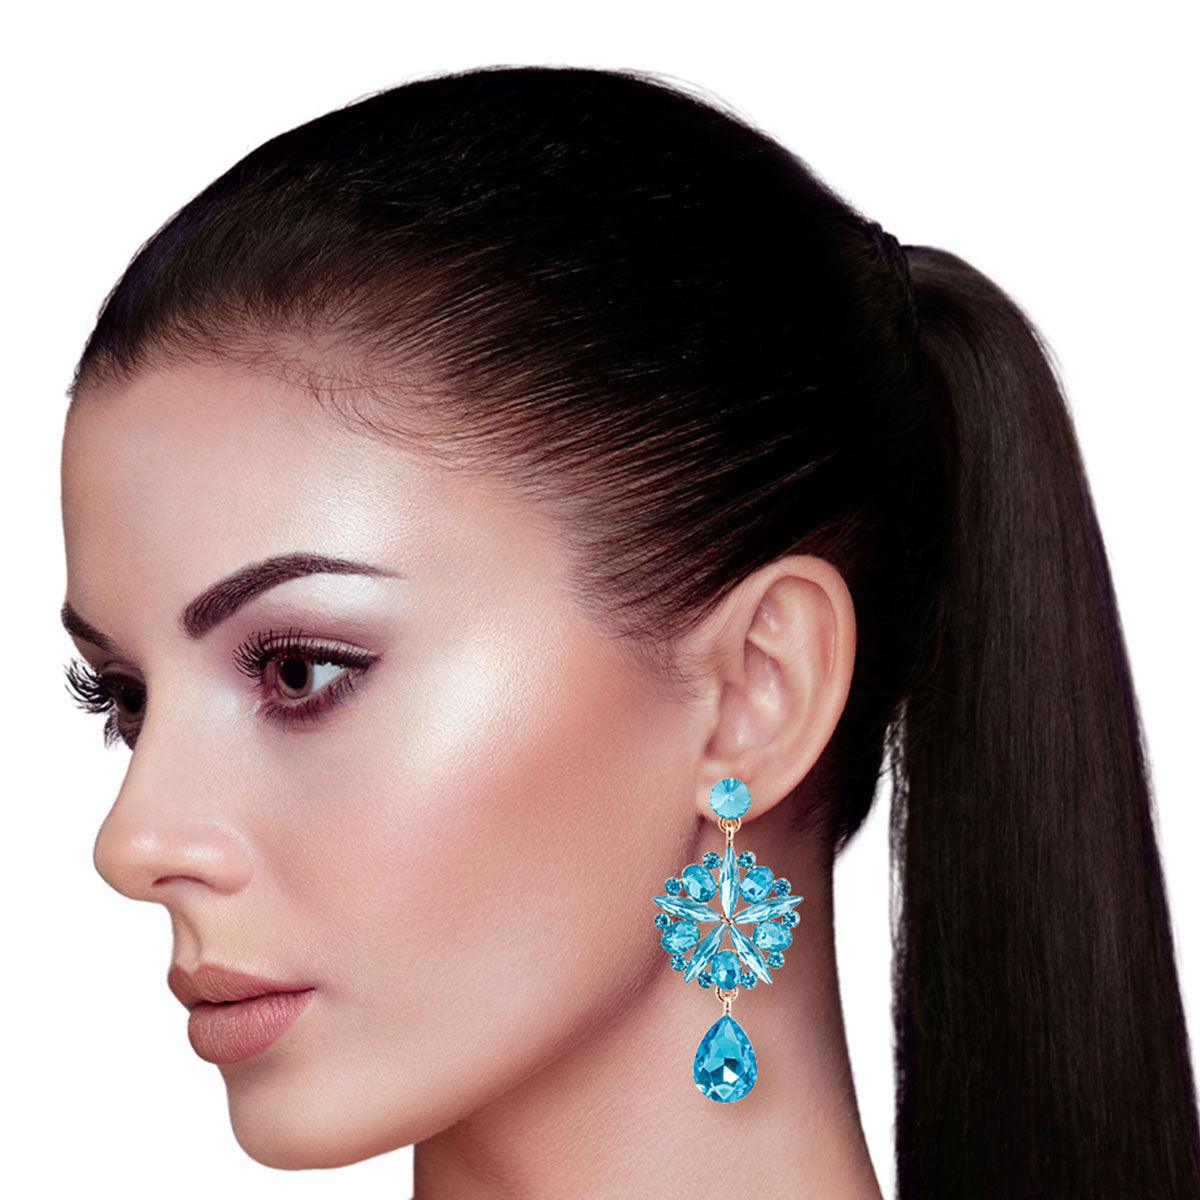 Eye-Catching Blue Sparkle Earrings - Make a Statement